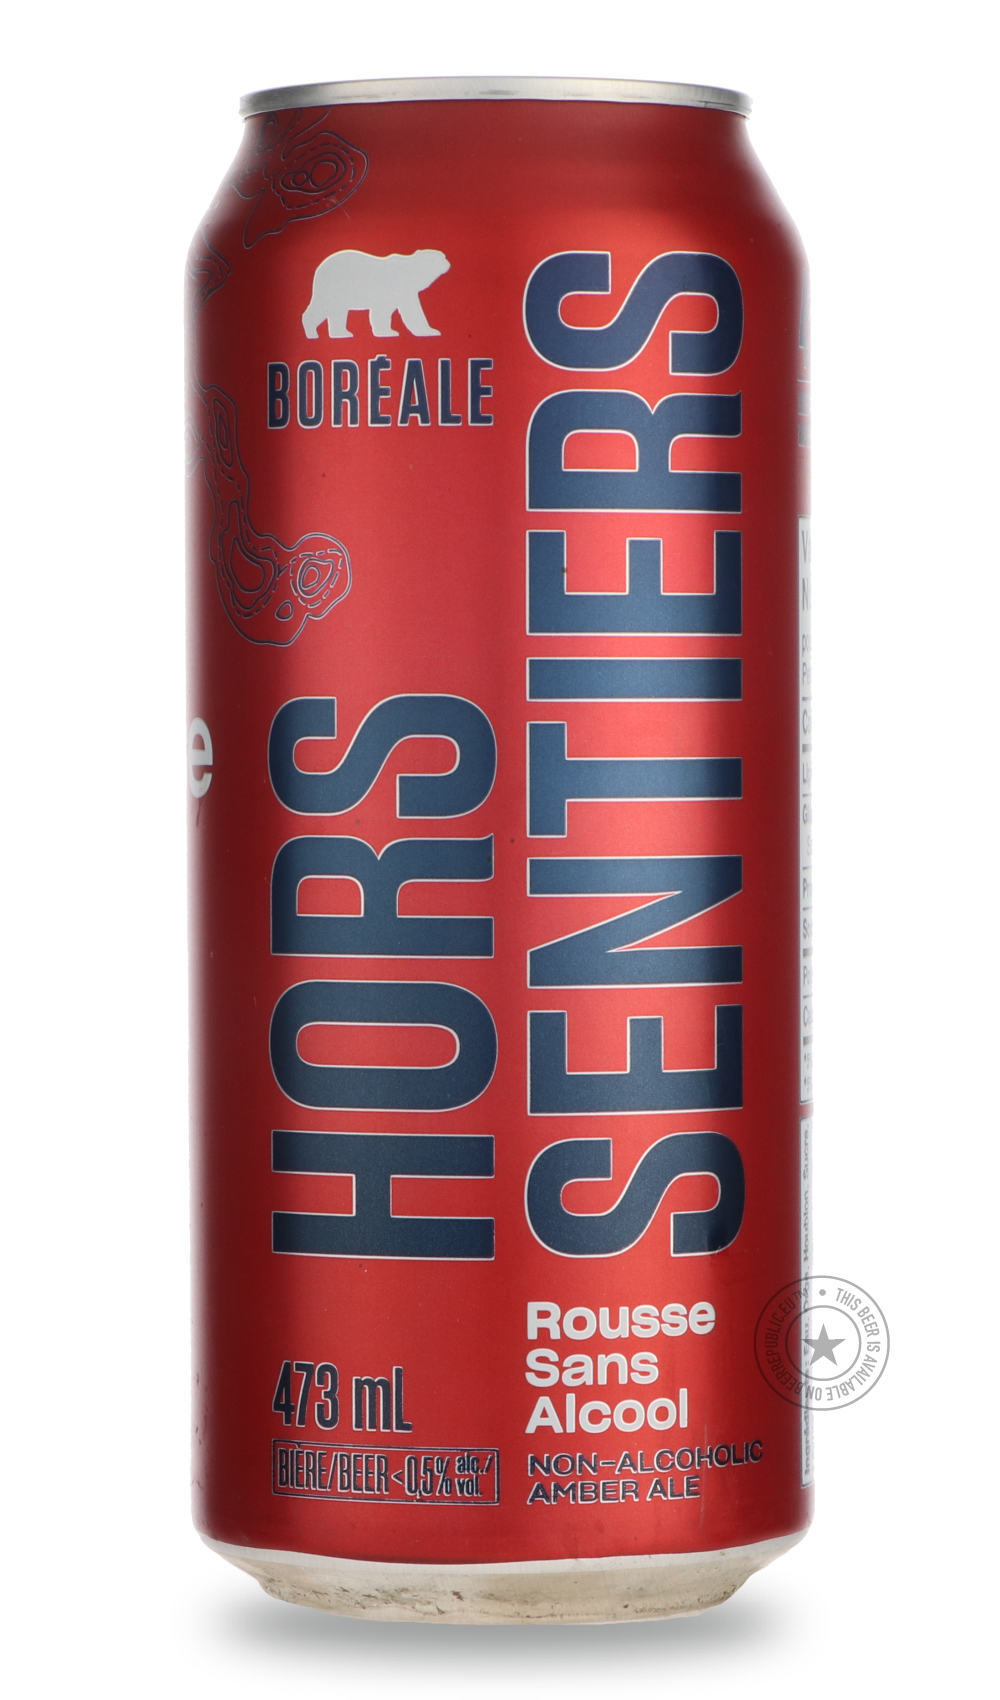 -Boréale- Hors Sentiers - Rousse Sans Alcool-Specials- Only @ Beer Republic - The best online beer store for American & Canadian craft beer - Buy beer online from the USA and Canada - Bier online kopen - Amerikaans bier kopen - Craft beer store - Craft beer kopen - Amerikanisch bier kaufen - Bier online kaufen - Acheter biere online - IPA - Stout - Porter - New England IPA - Hazy IPA - Imperial Stout - Barrel Aged - Barrel Aged Imperial Stout - Brown - Dark beer - Blond - Blonde - Pilsner - Lager - Wheat - 